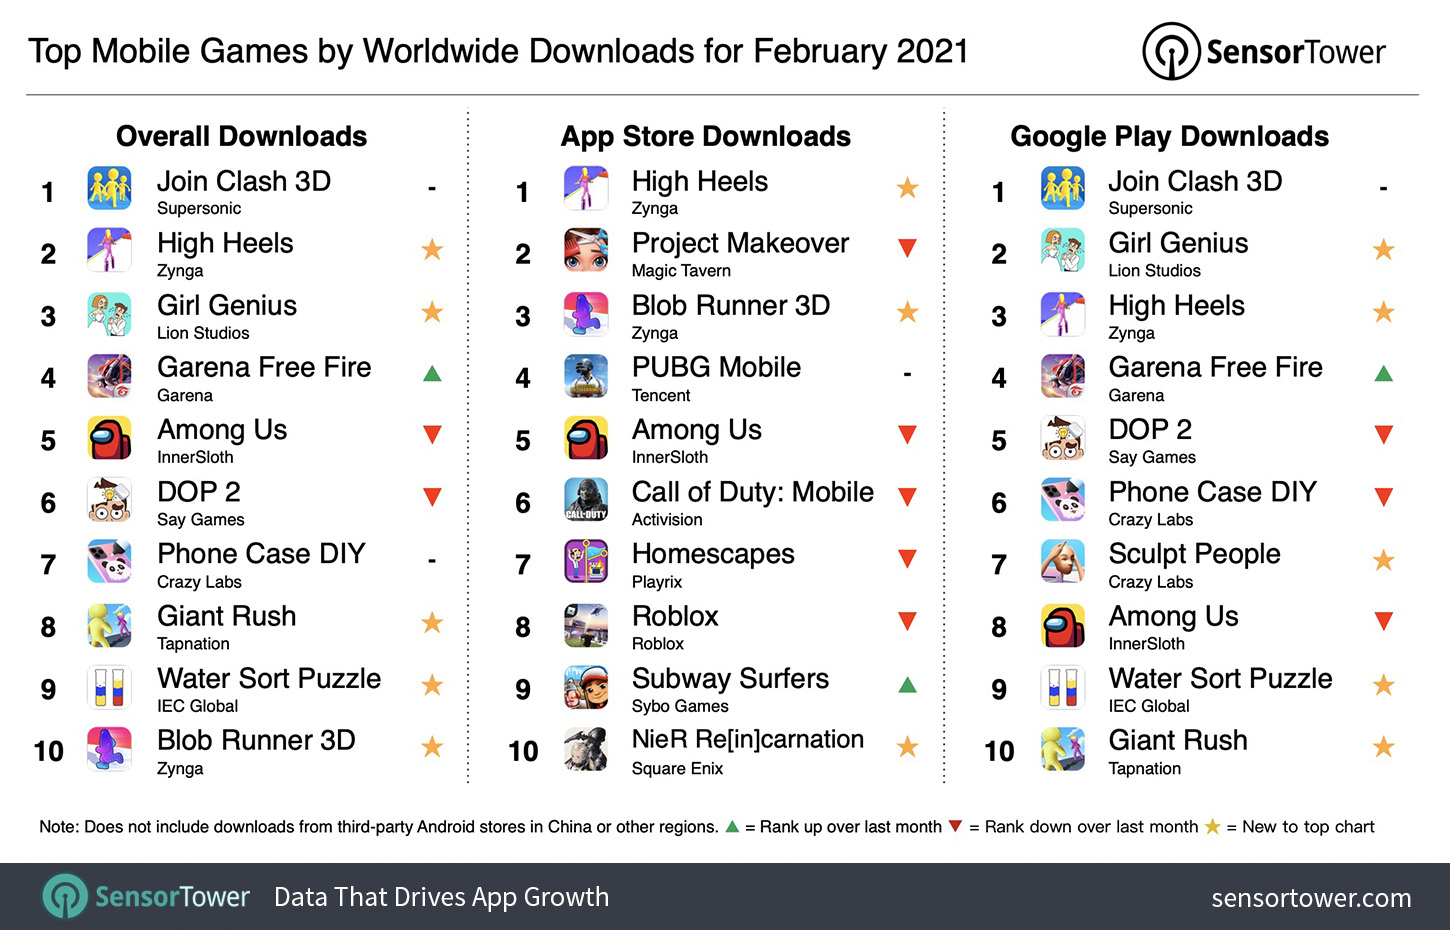 Top Mobile Games Worldwide for February 2021 by Downloads